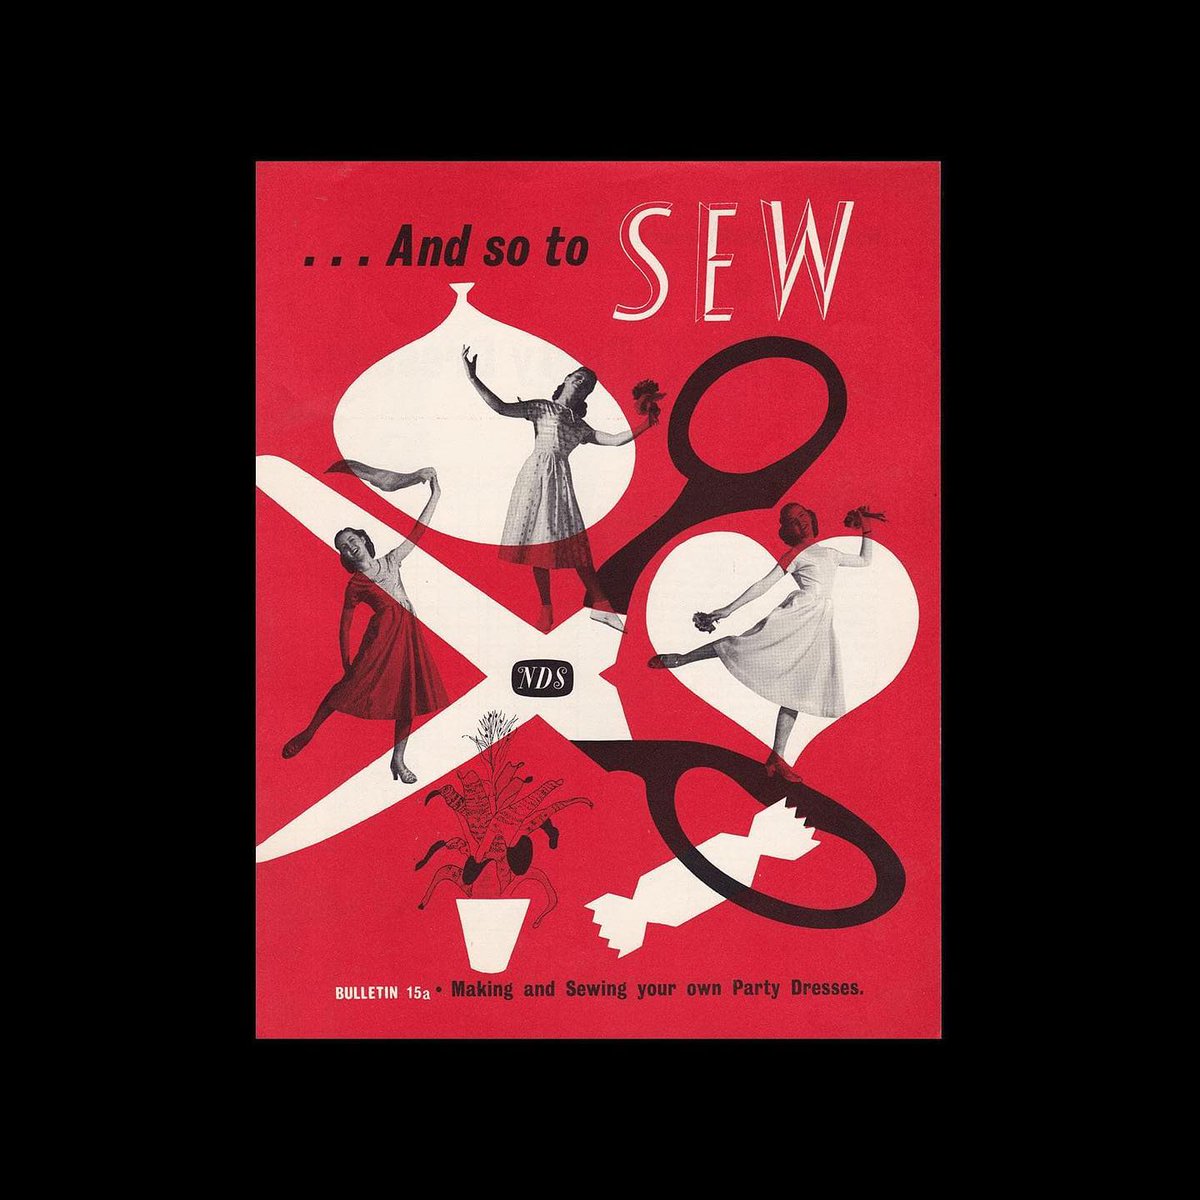 Both the And So To Embroider & And So to Sew bulletins were published by the Needlework Development Scheme. Established in 1934 and operating until 1961, the scheme was a partnership between educational establishments (Scottish art schools, Aberdeen, Dundee, Edinburgh and